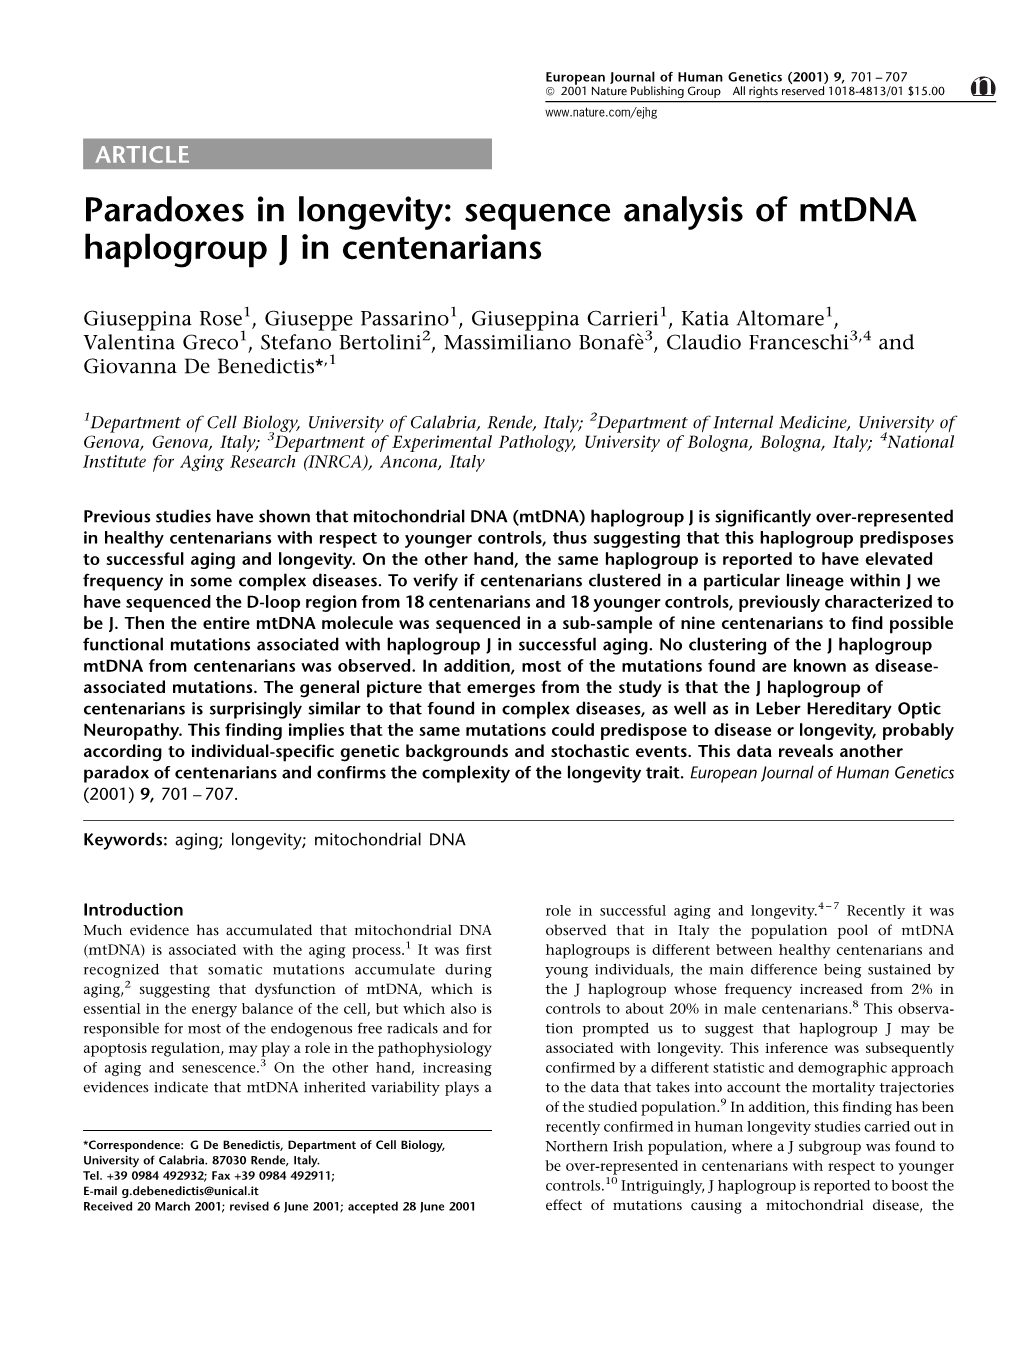 Paradoxes in Longevity: Sequence Analysis of Mtdna Haplogroup J in Centenarians